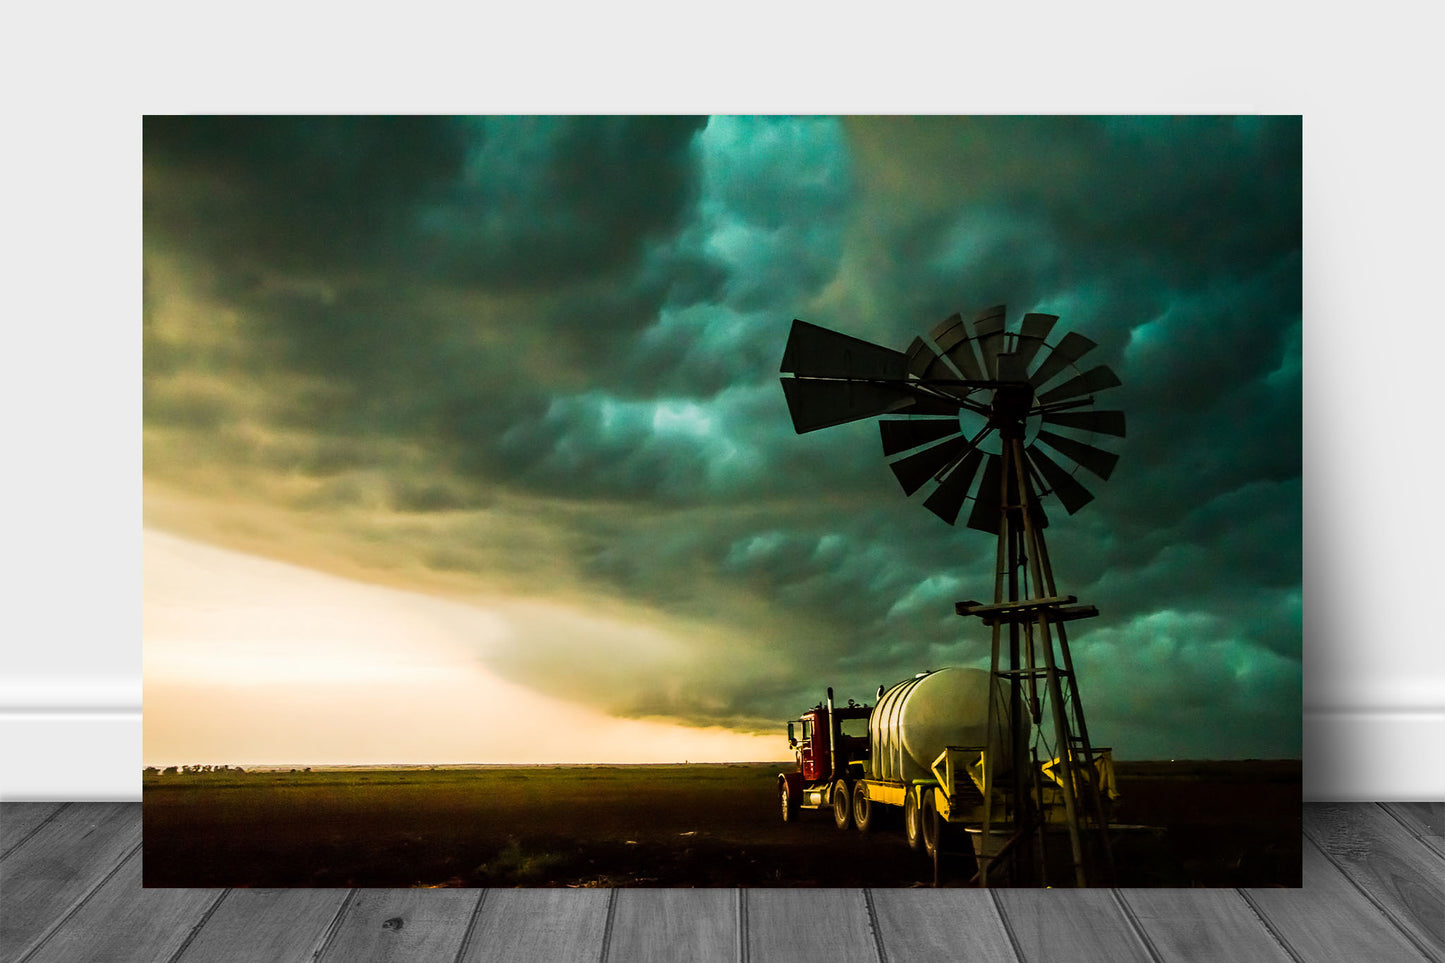 Country metal print of a thunderstorm advancing over an old windmill and truck on a stormy summer day in Oklahoma by Sean Ramsey of Southern Plains Photography.